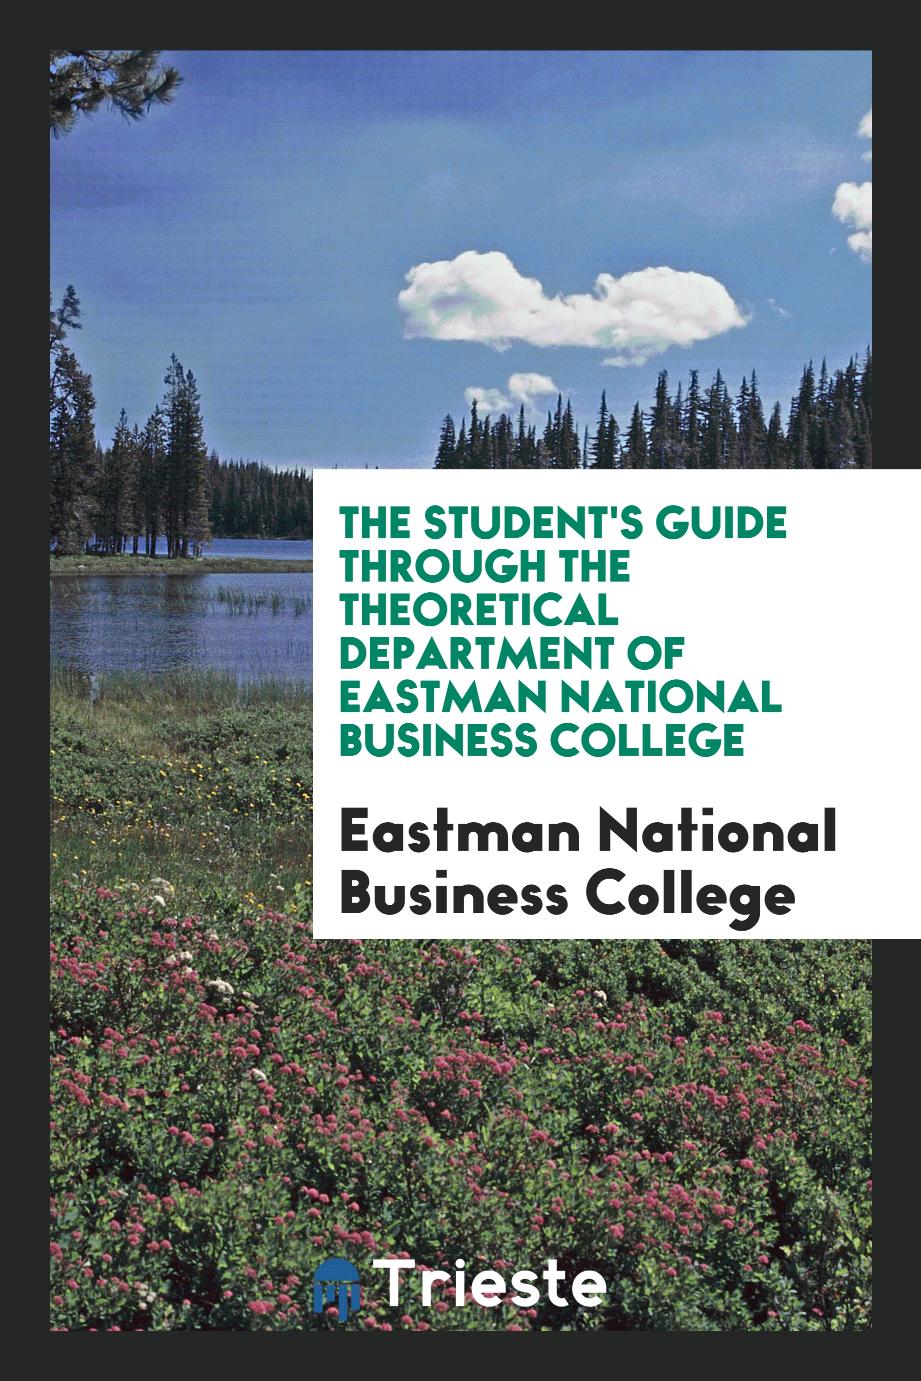 The Student's Guide Through the Theoretical Department of Eastman National Business College